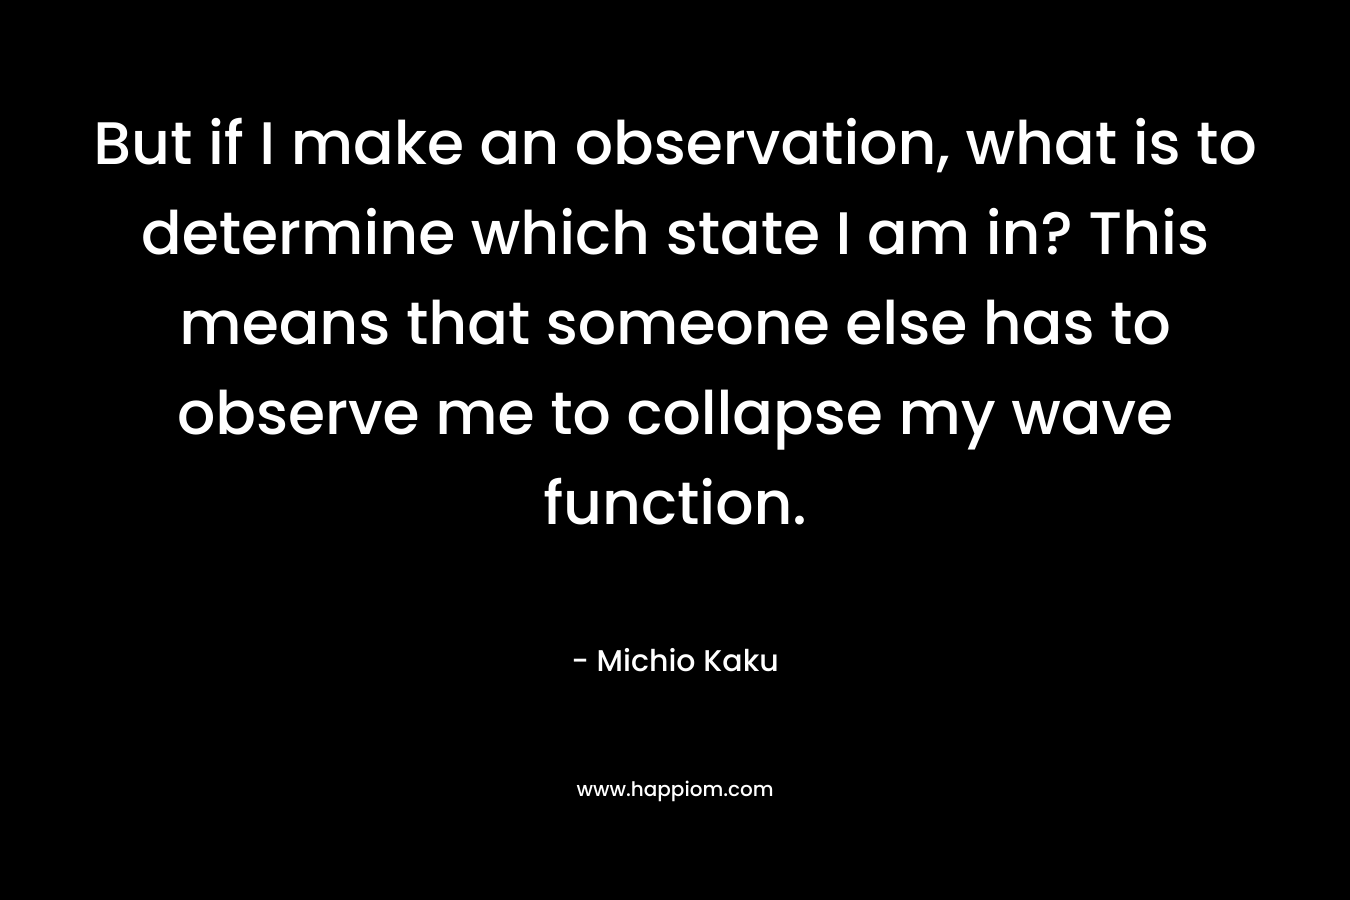 But if I make an observation, what is to determine which state I am in? This means that someone else has to observe me to collapse my wave function.